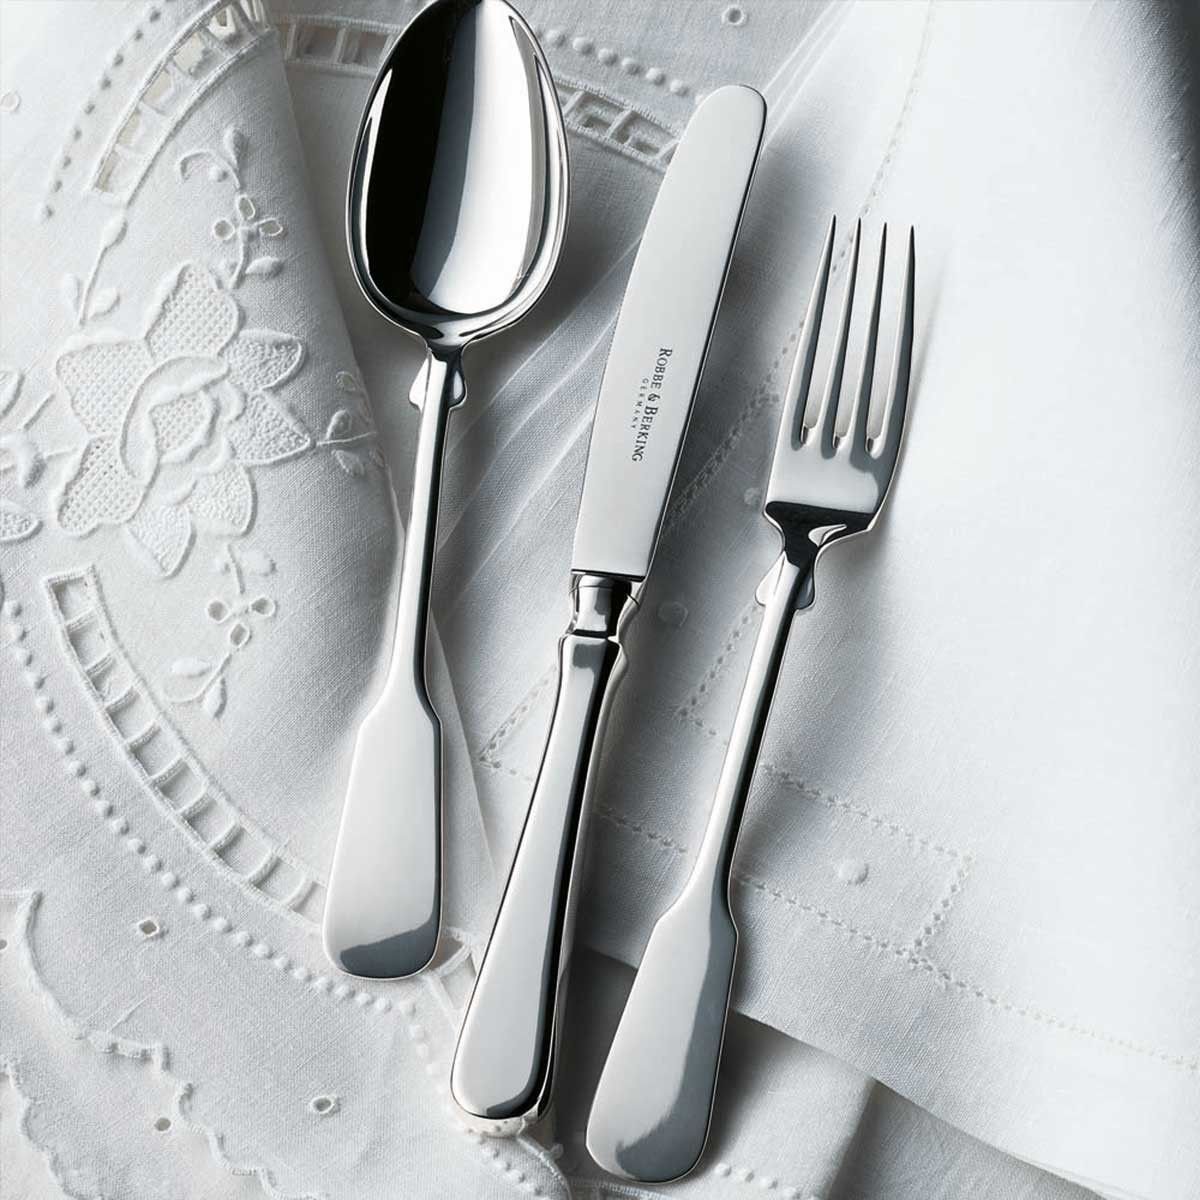 More style with fine cutlery and silverware